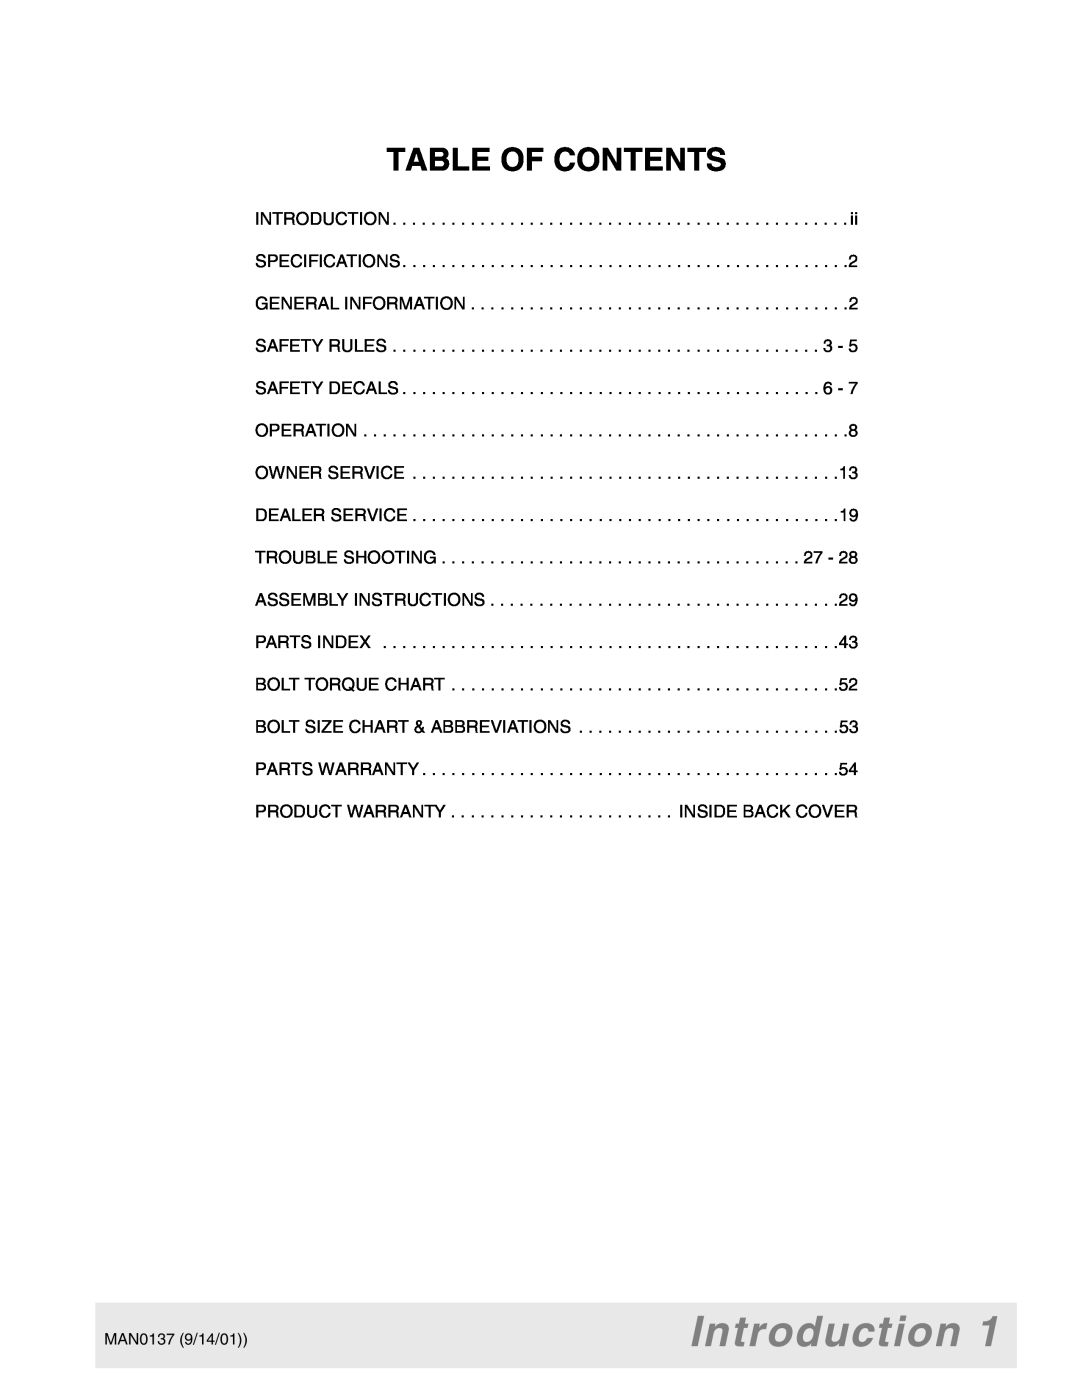 Woods Equipment 7000, 7192, 7194, 7195, 7200, 7205 manual Introduction, Table Of Contents 